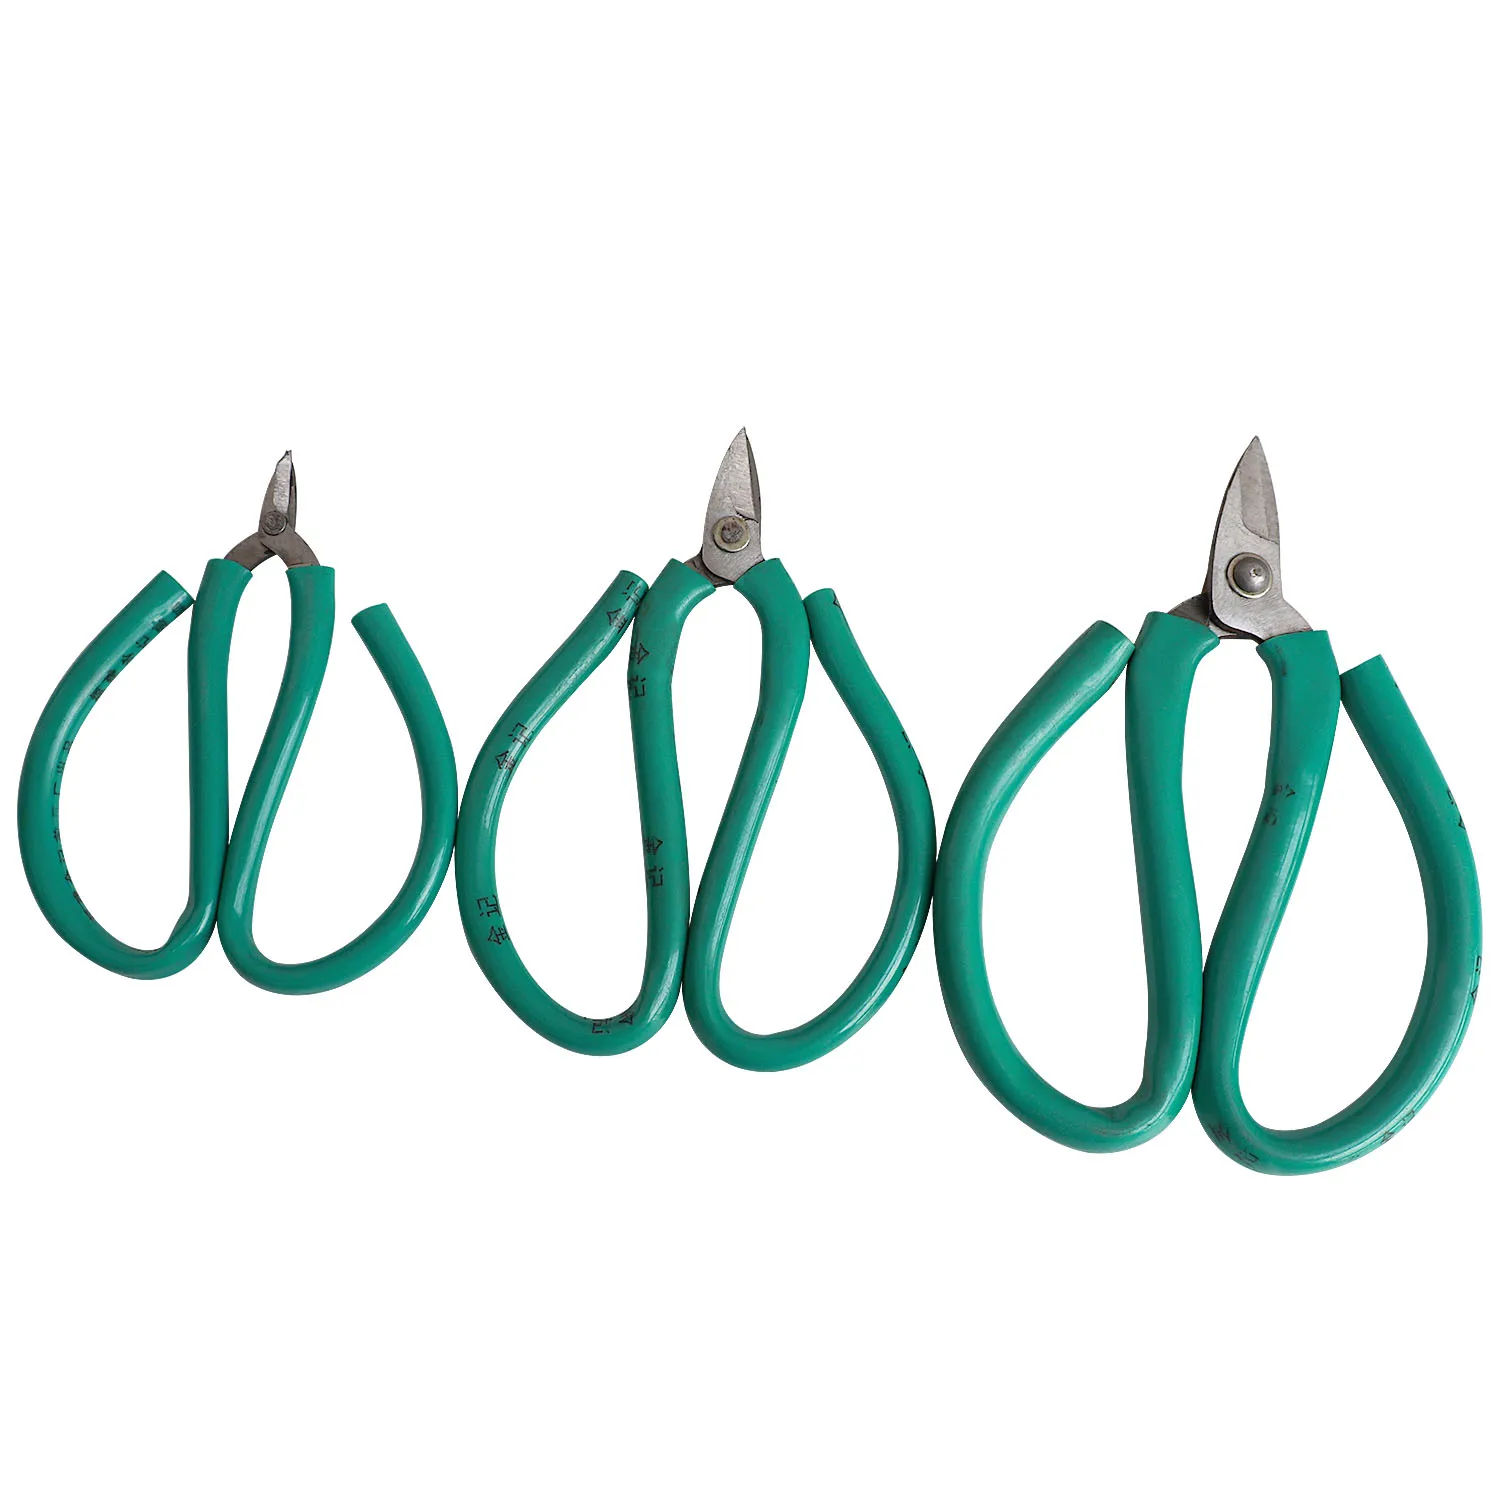 Stainless Steel Craft Supplies Green Handle Scissors for Jewelry Repair Worker Jewelry Maker